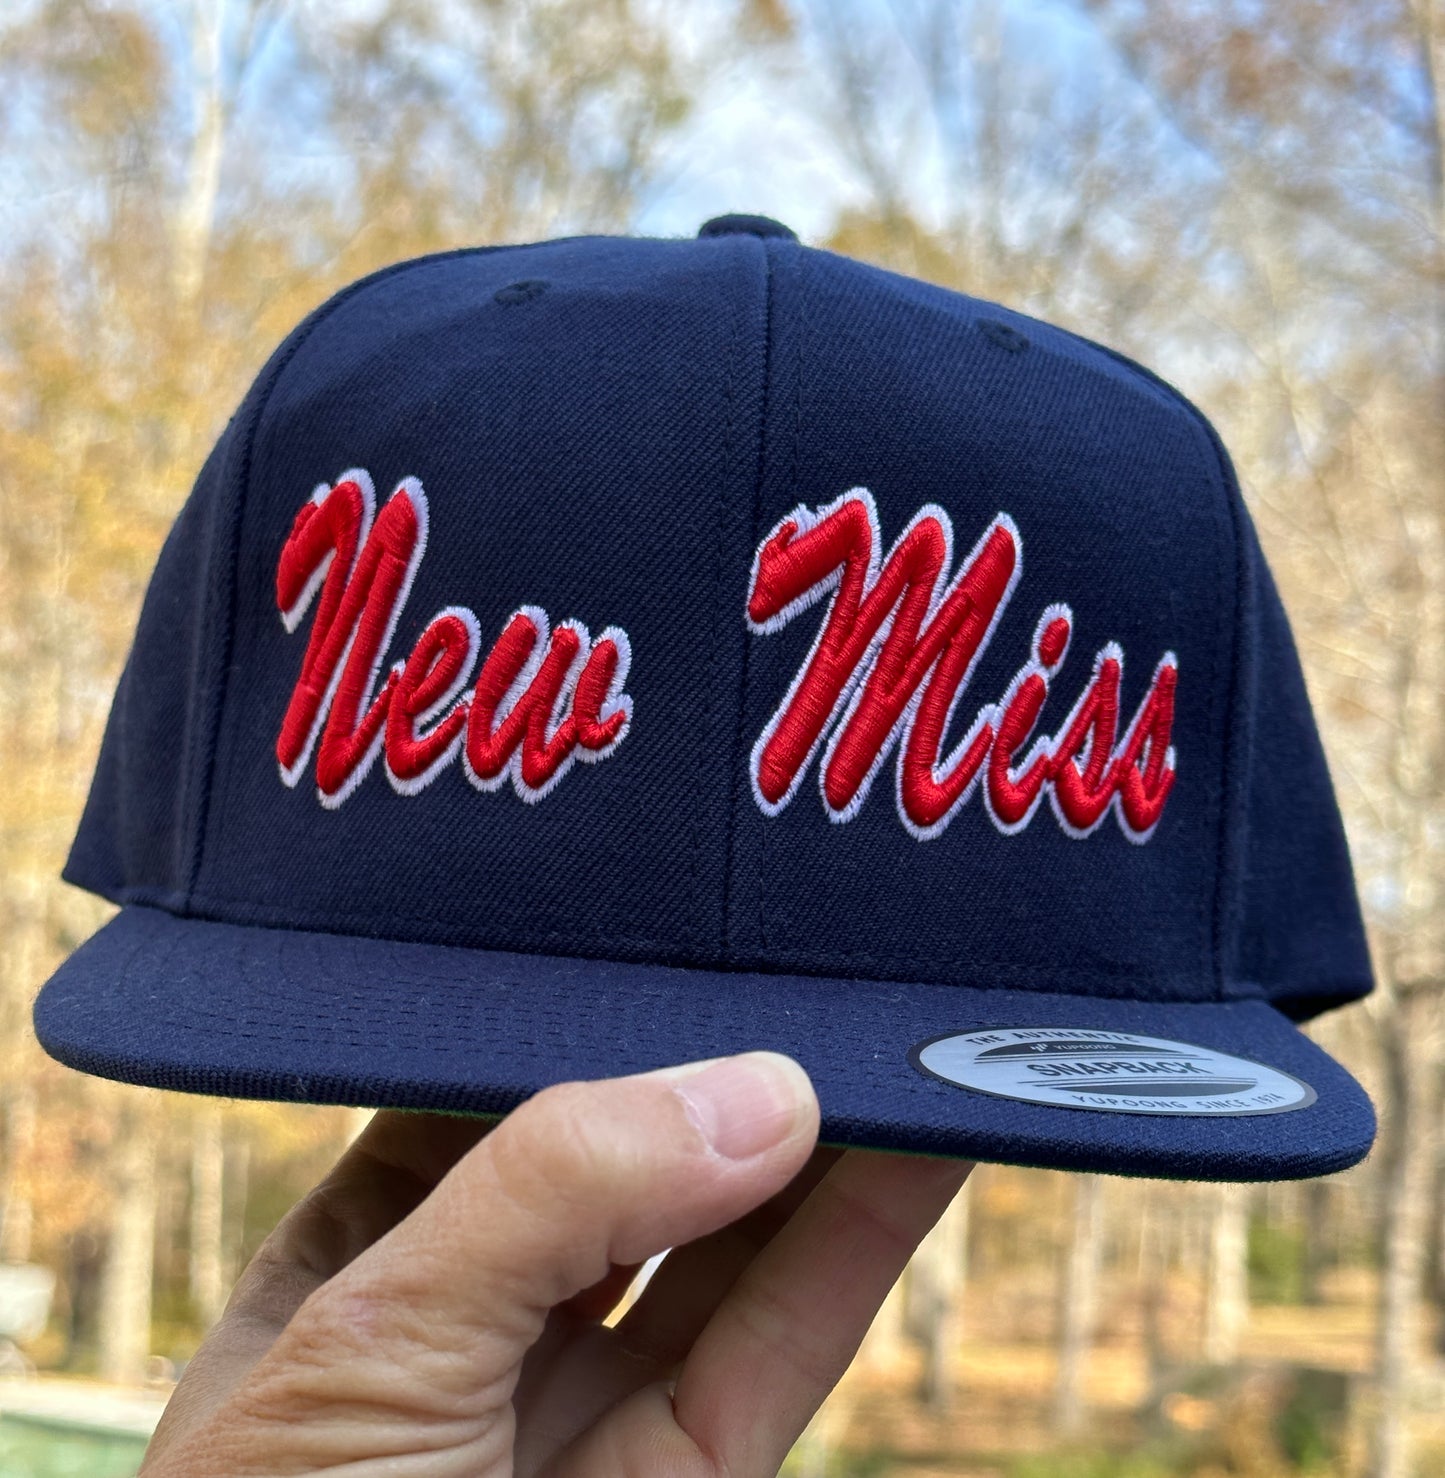 Limited Edition FLAT BRIM New Miss Baseball Hat- (with green under side of brim)-- OR NAVY BLUE FLAT BRIM CAP NOW AVAILABLE